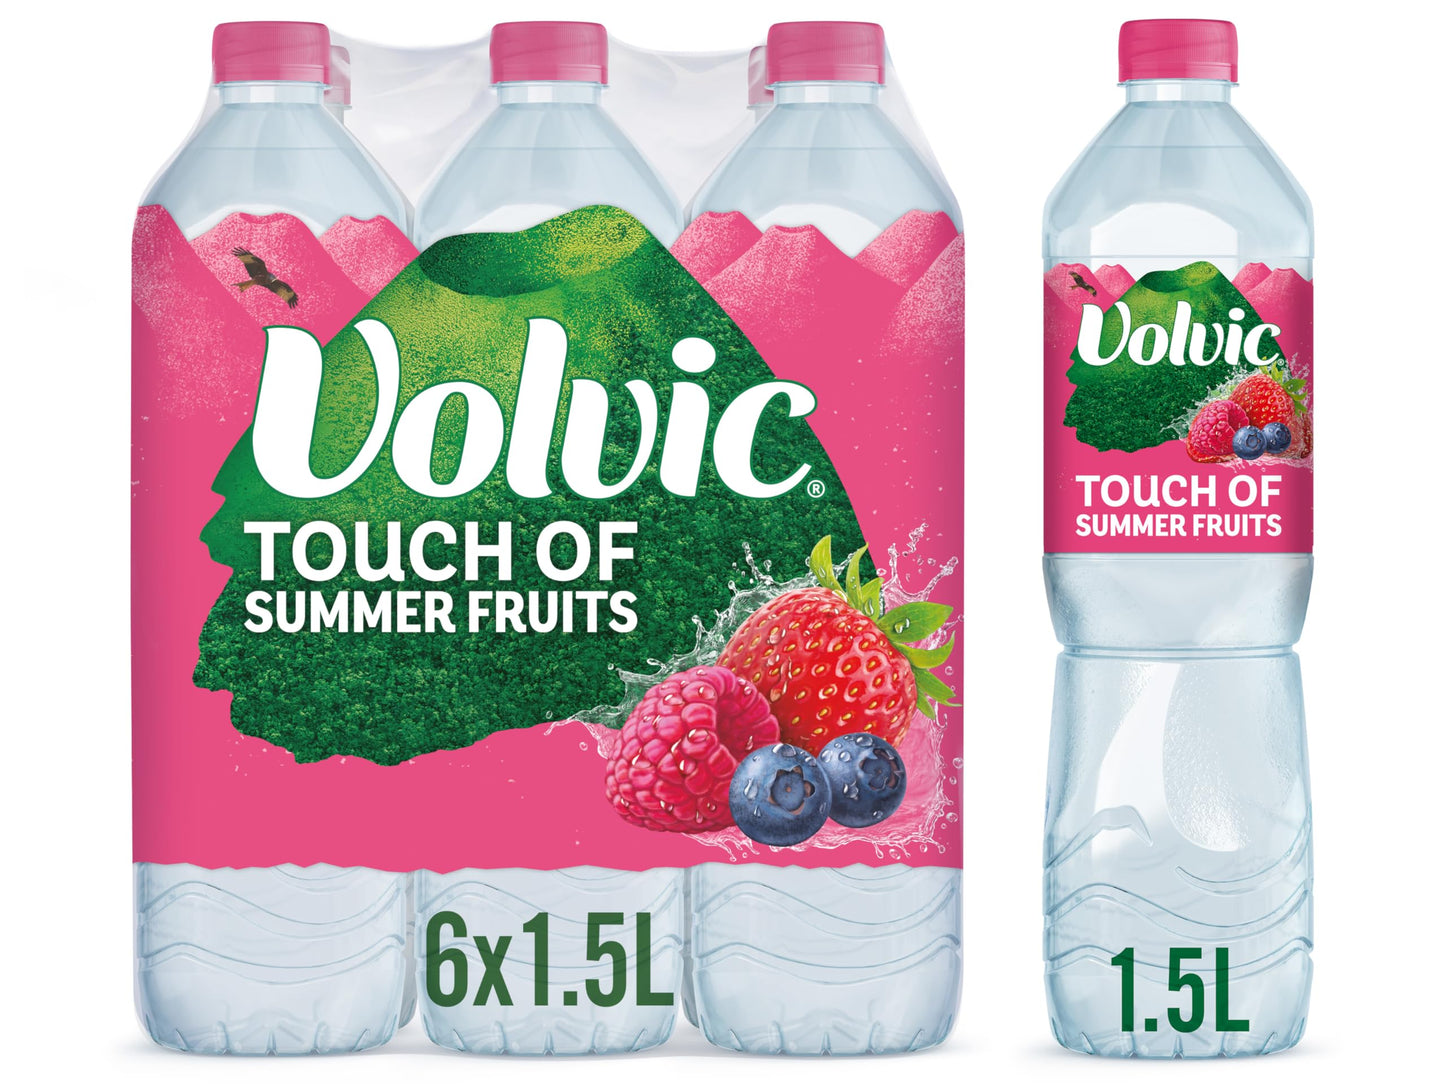 Volvic Touch of Fruit Summer Fruits Original 1.5L (6 Pack)